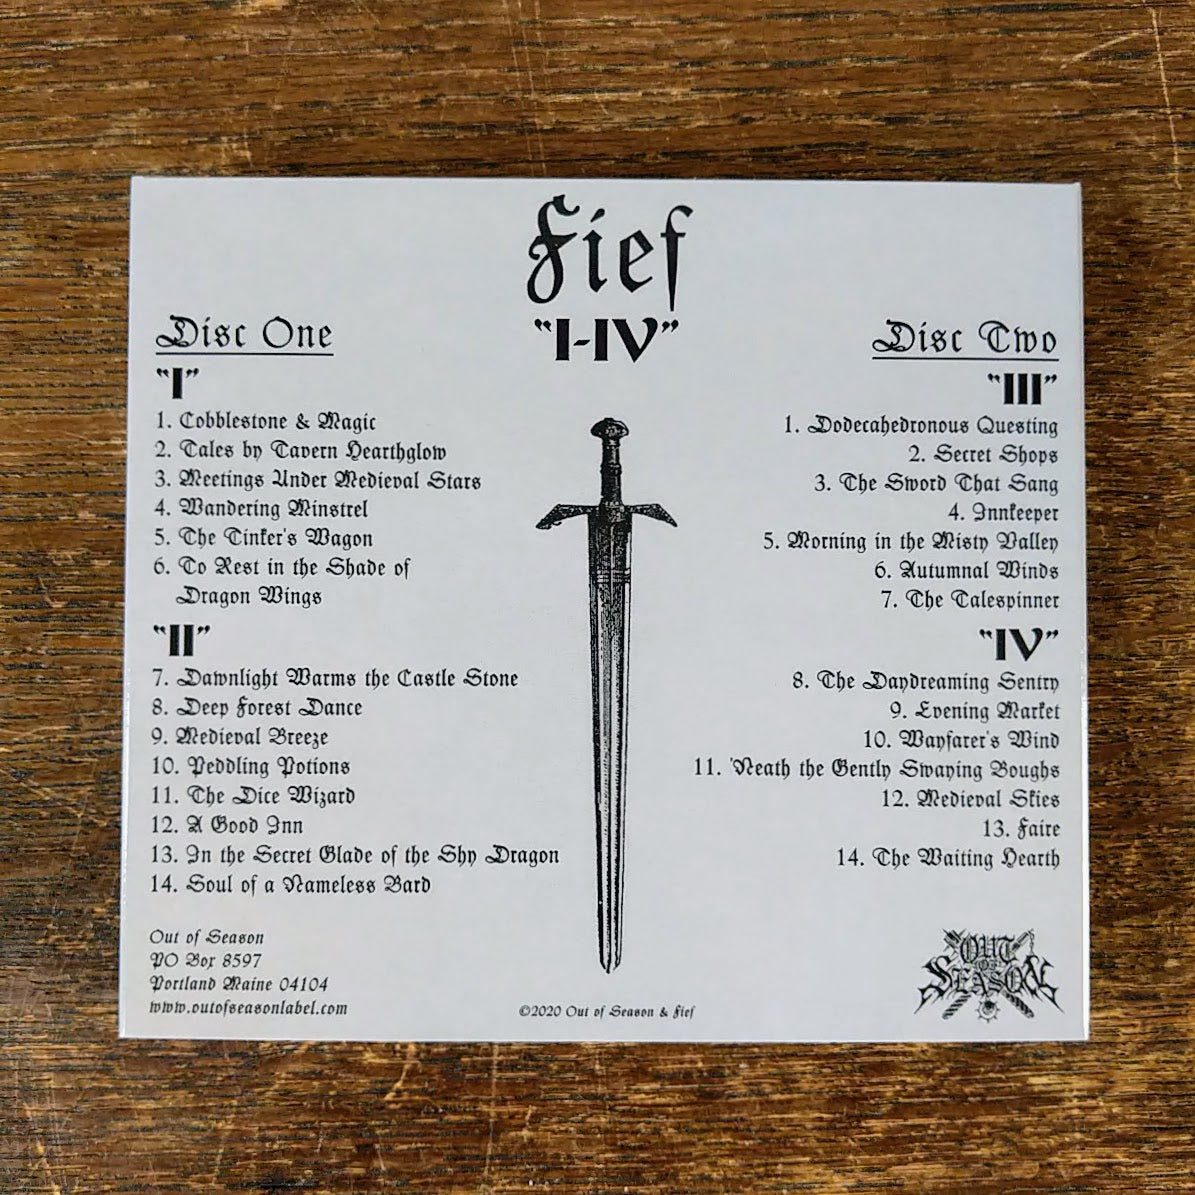 [SOLD OUT] FIEF "I-IV" Double CD [2xCD digipak]